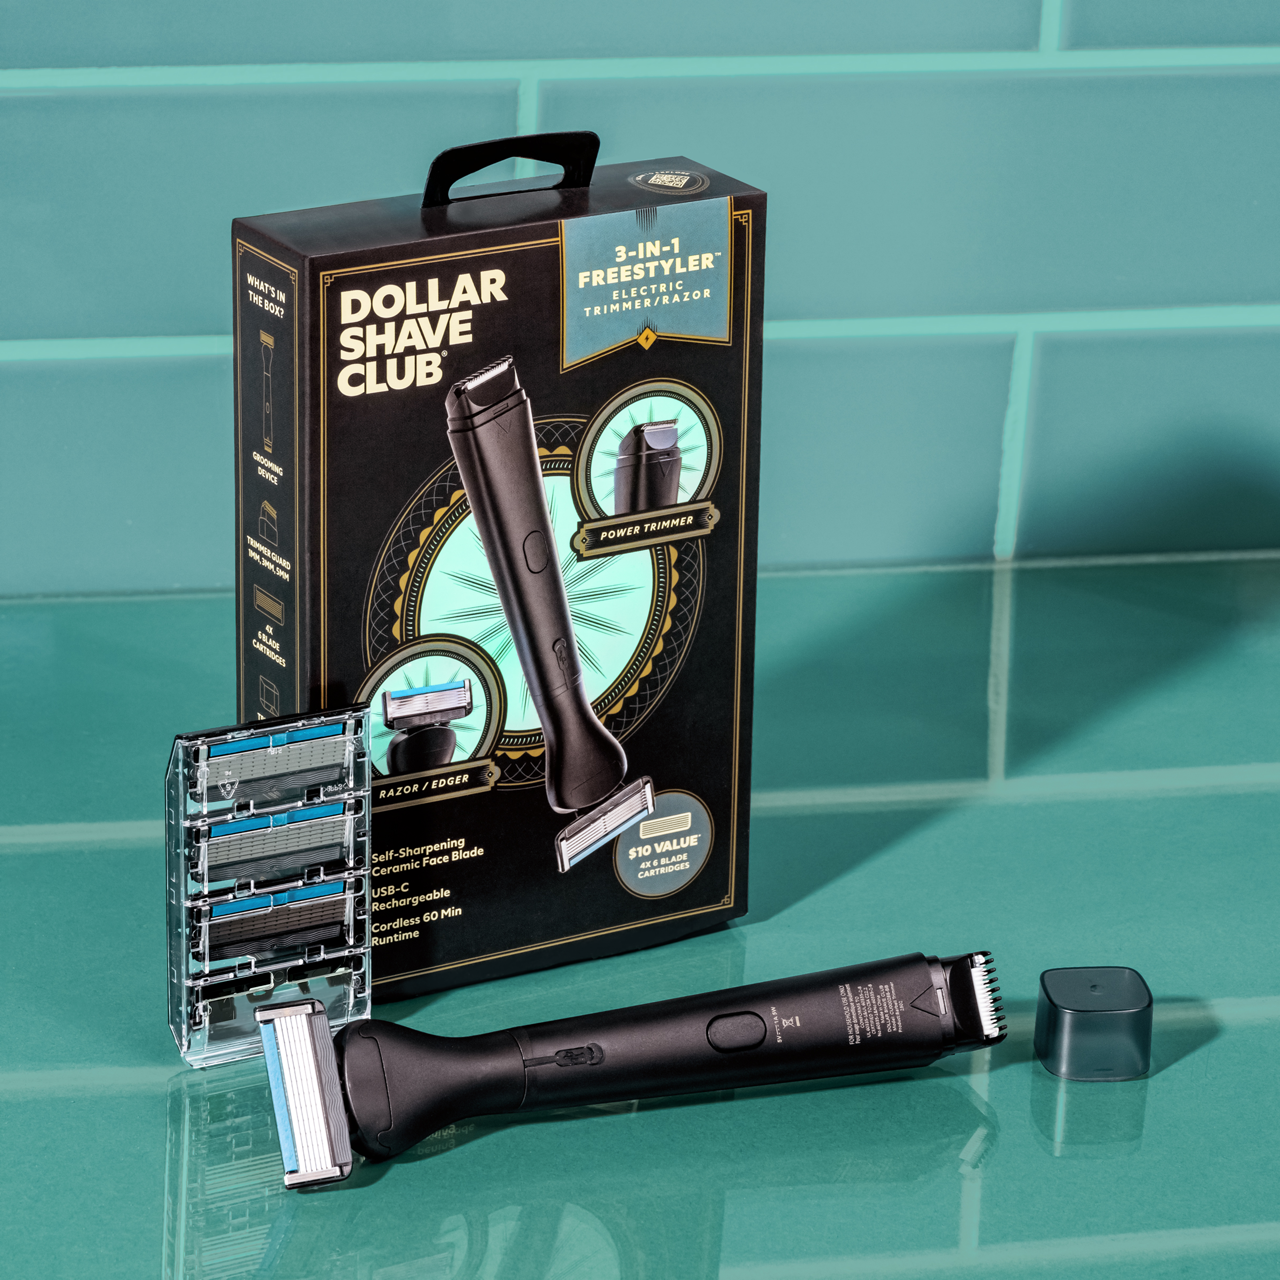 A photo of the 3-in-1 Freestyles with trimmer cap, 4 ct cassette of Club Series 6 Blade Razors, and the packaging box on a teal green counter with teal green tile in the background